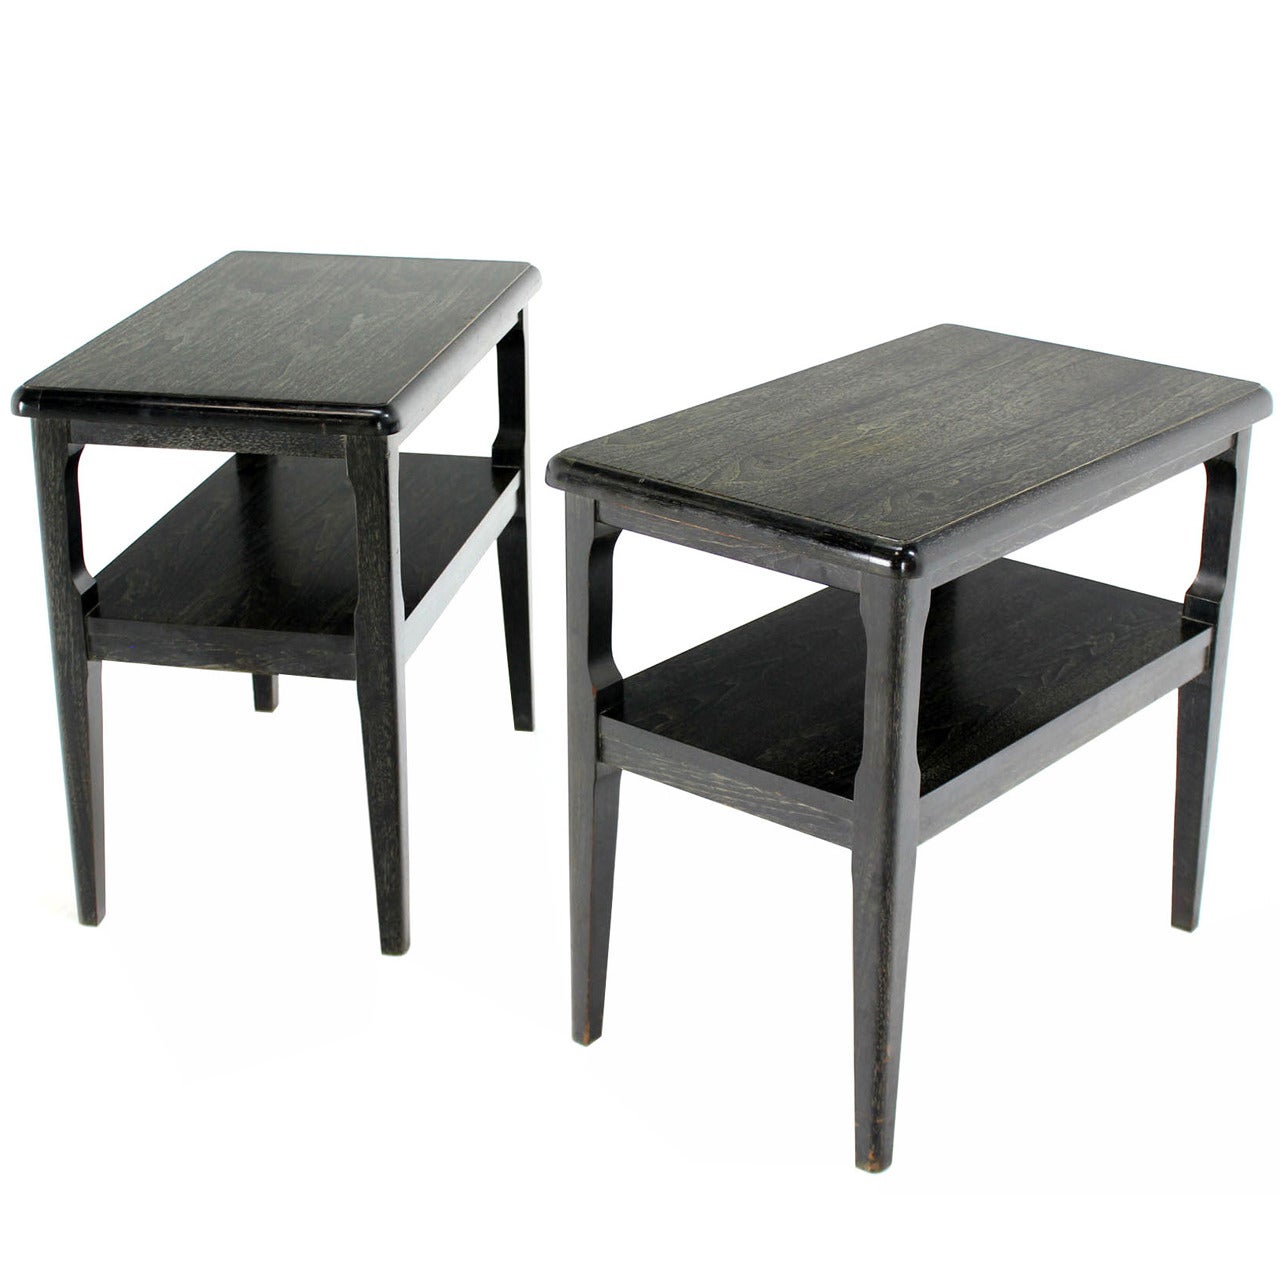 Pair of Black Cerused Oak Lacquer Finish End or Side Tables